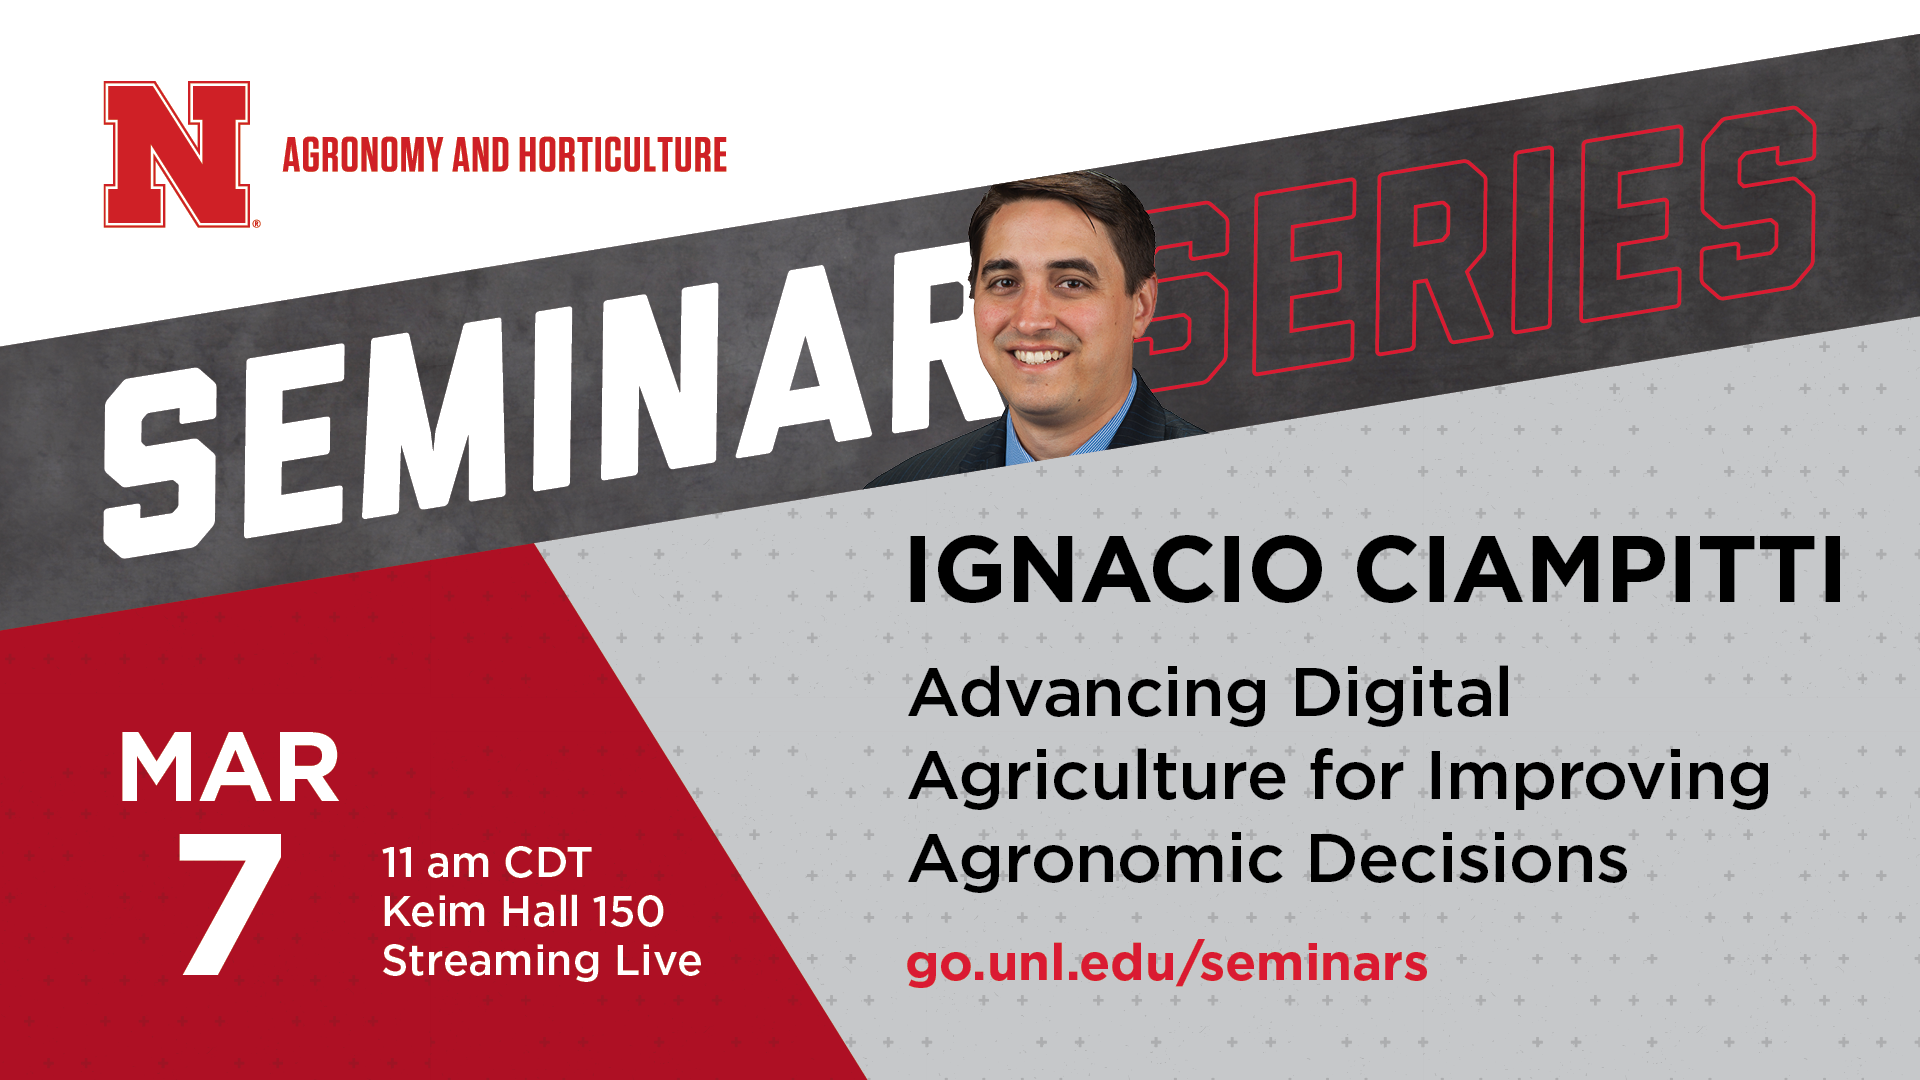 Ignacio Ciampitti, professor, farming systems, Department of Agronomy, and Director, Institute for Digital Agriculture and Advanced Analytics, Kansas State University, will present the next Agronomy and Horticulture seminar on March 7..